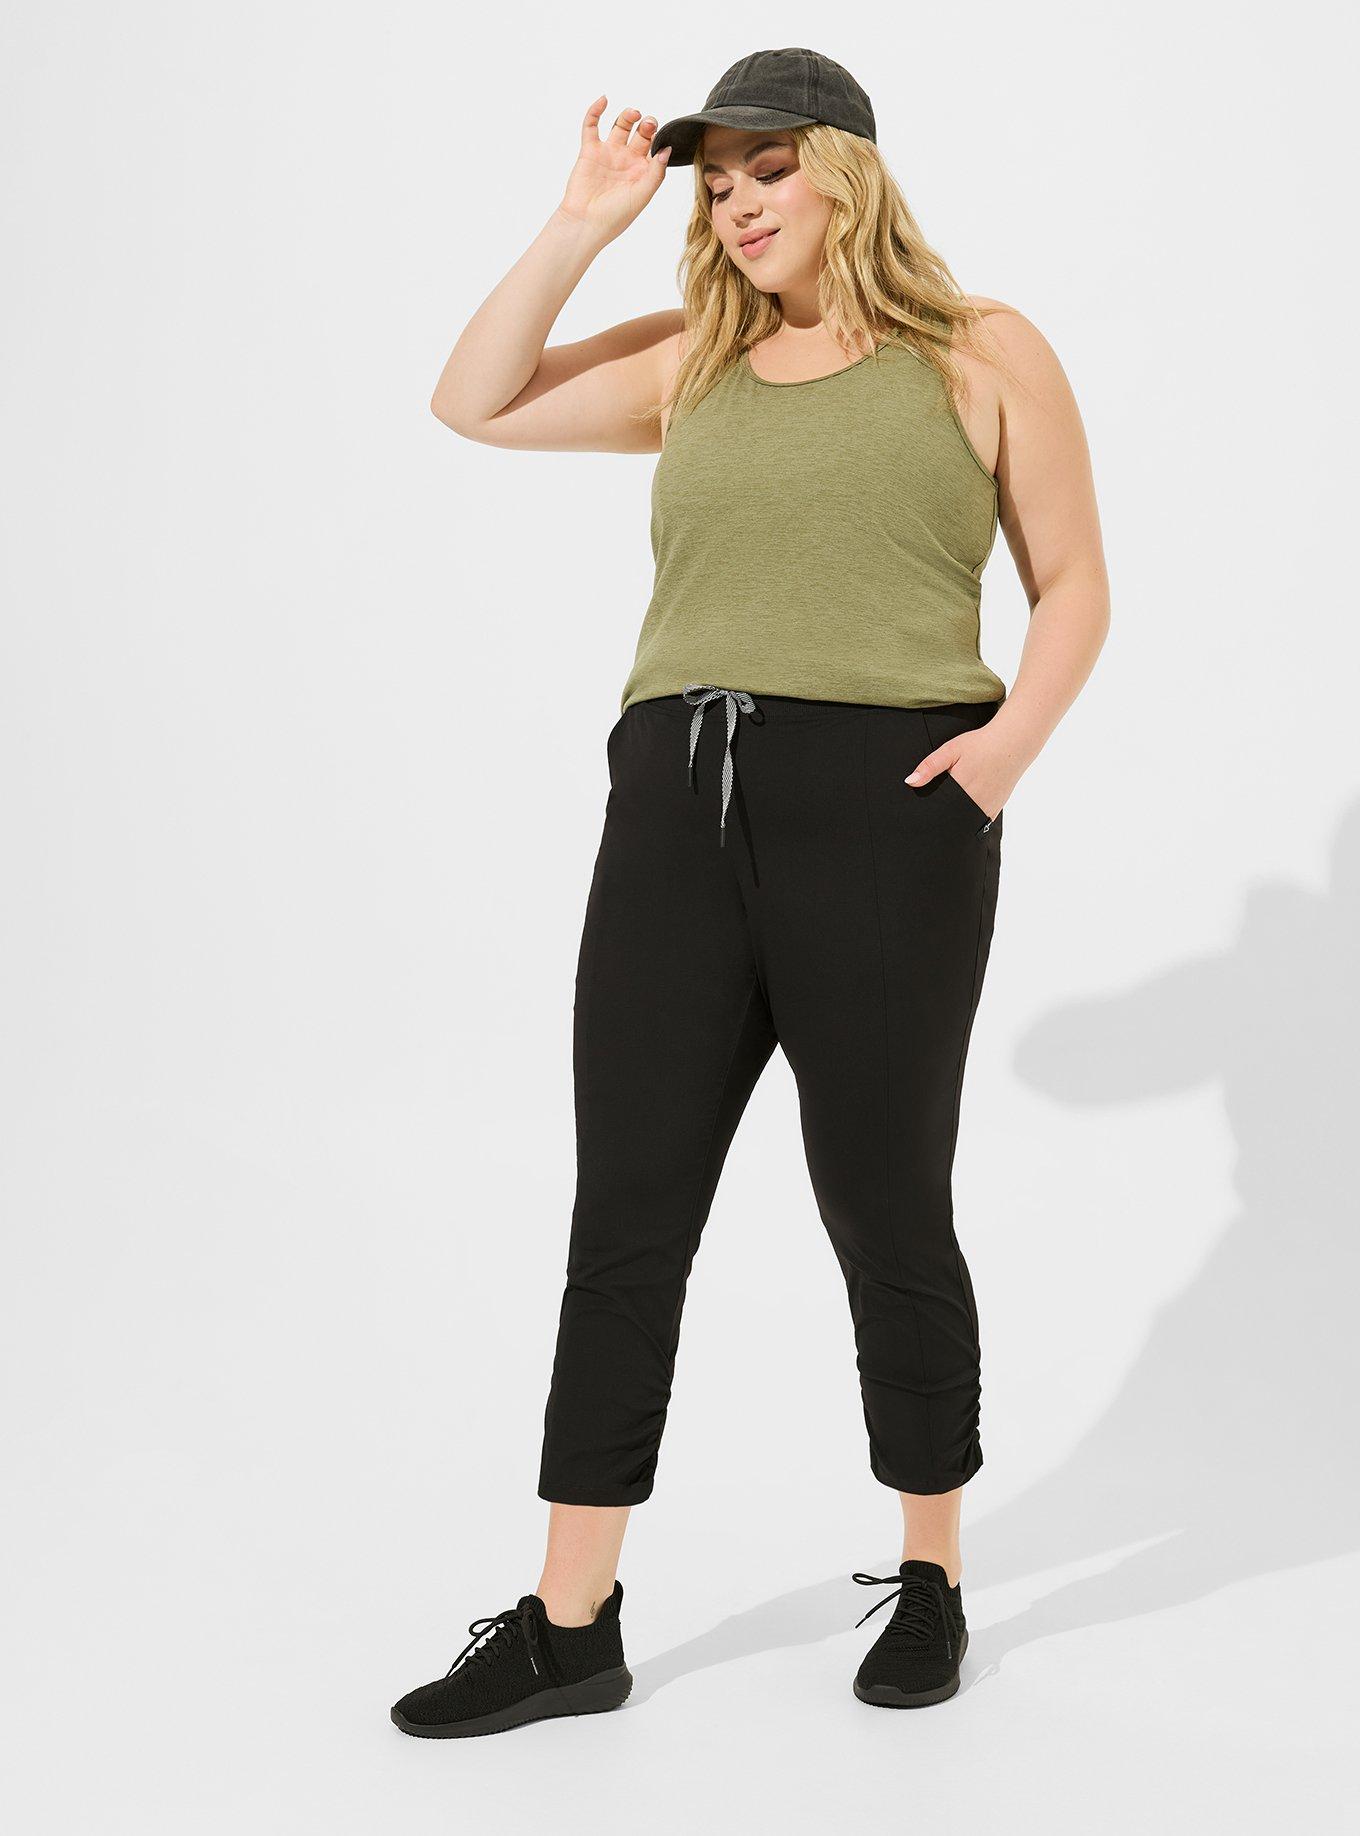 Torrid Plus Size Women's Clothing for sale in Springfield